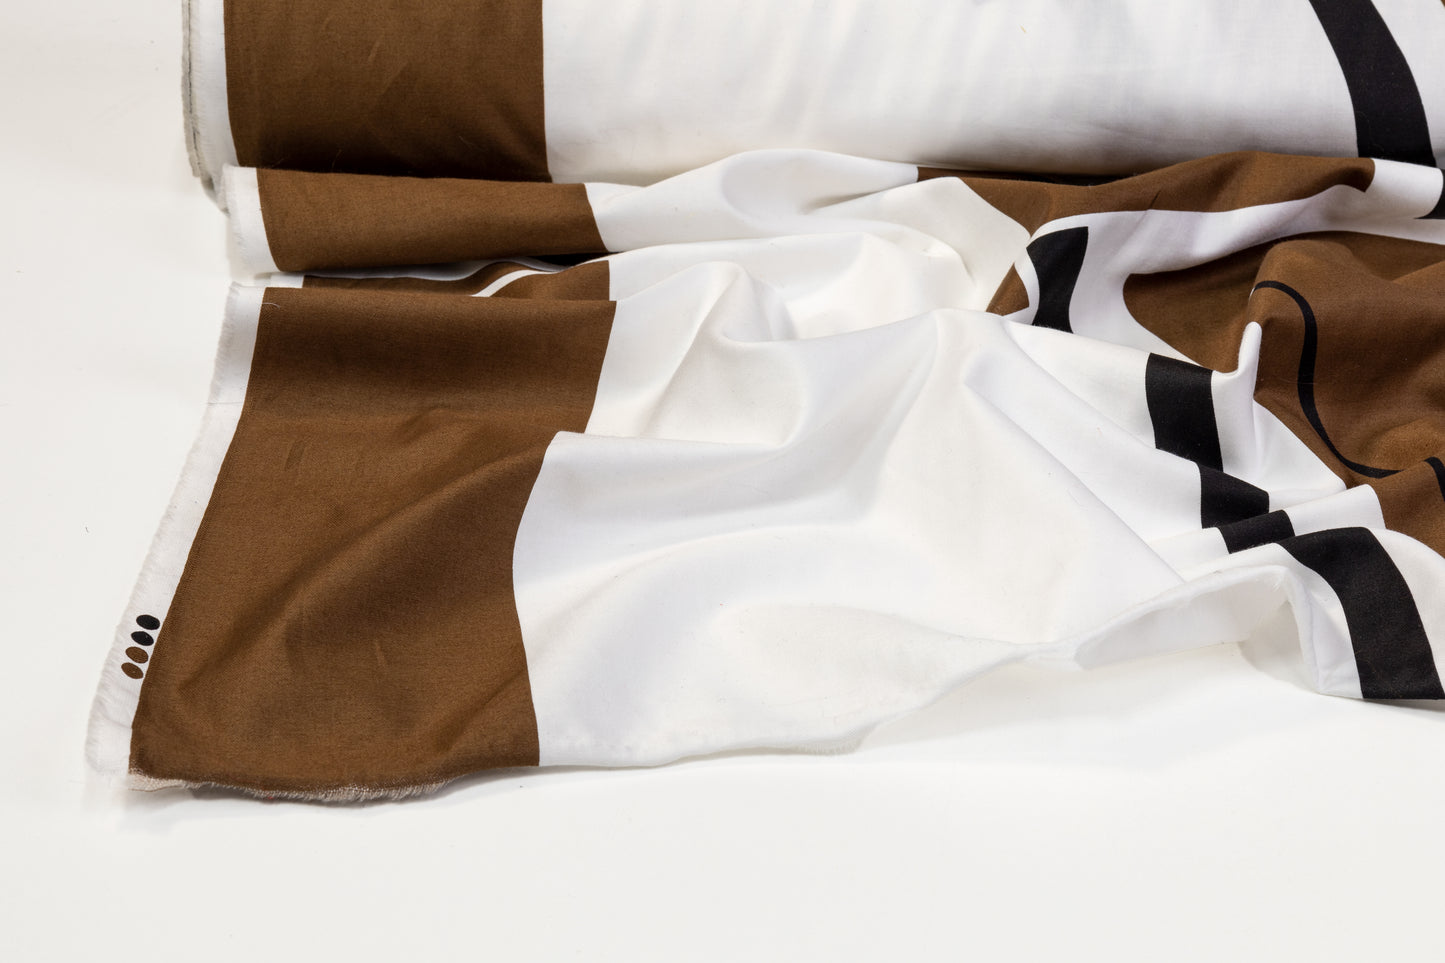 Abstract Cotton Sateen - Brown, White, Black